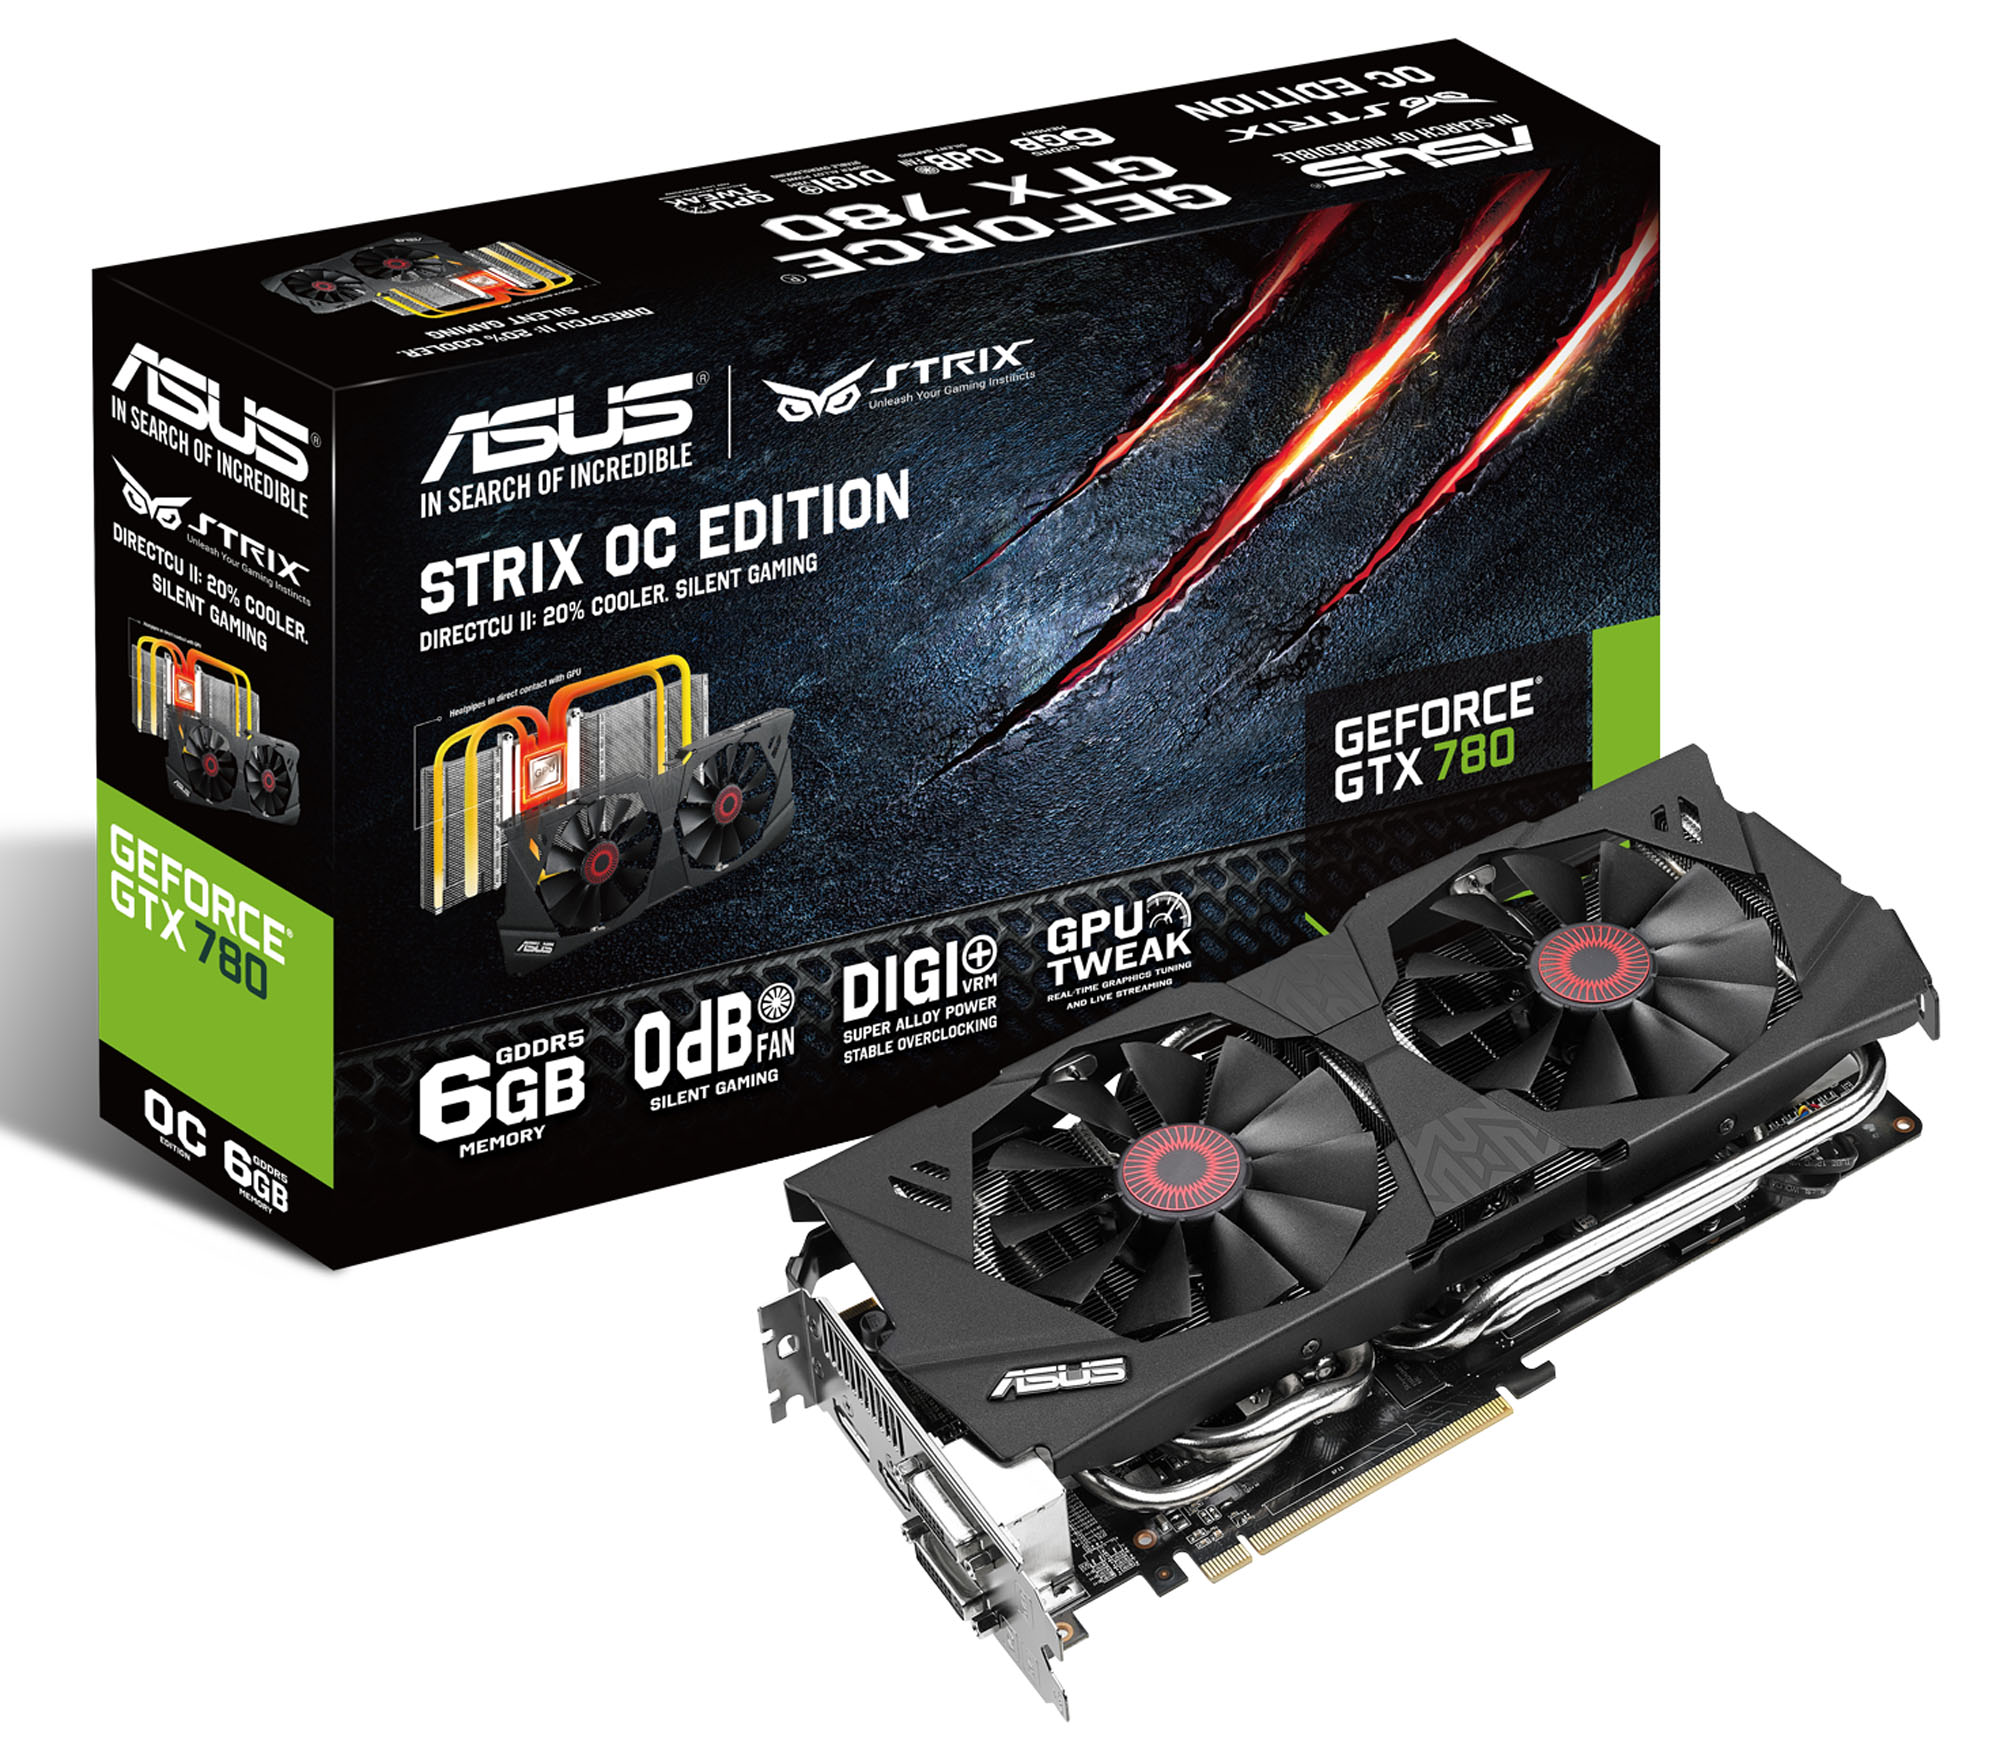 Media asset in full size related to 3dfxzone.it news item entitled as follows: ASUS annuncia le card non reference Strix R9 280 e Strix GTX 780 | Image Name: news21212_ASUS-Strix-GTX-780_1.jpg